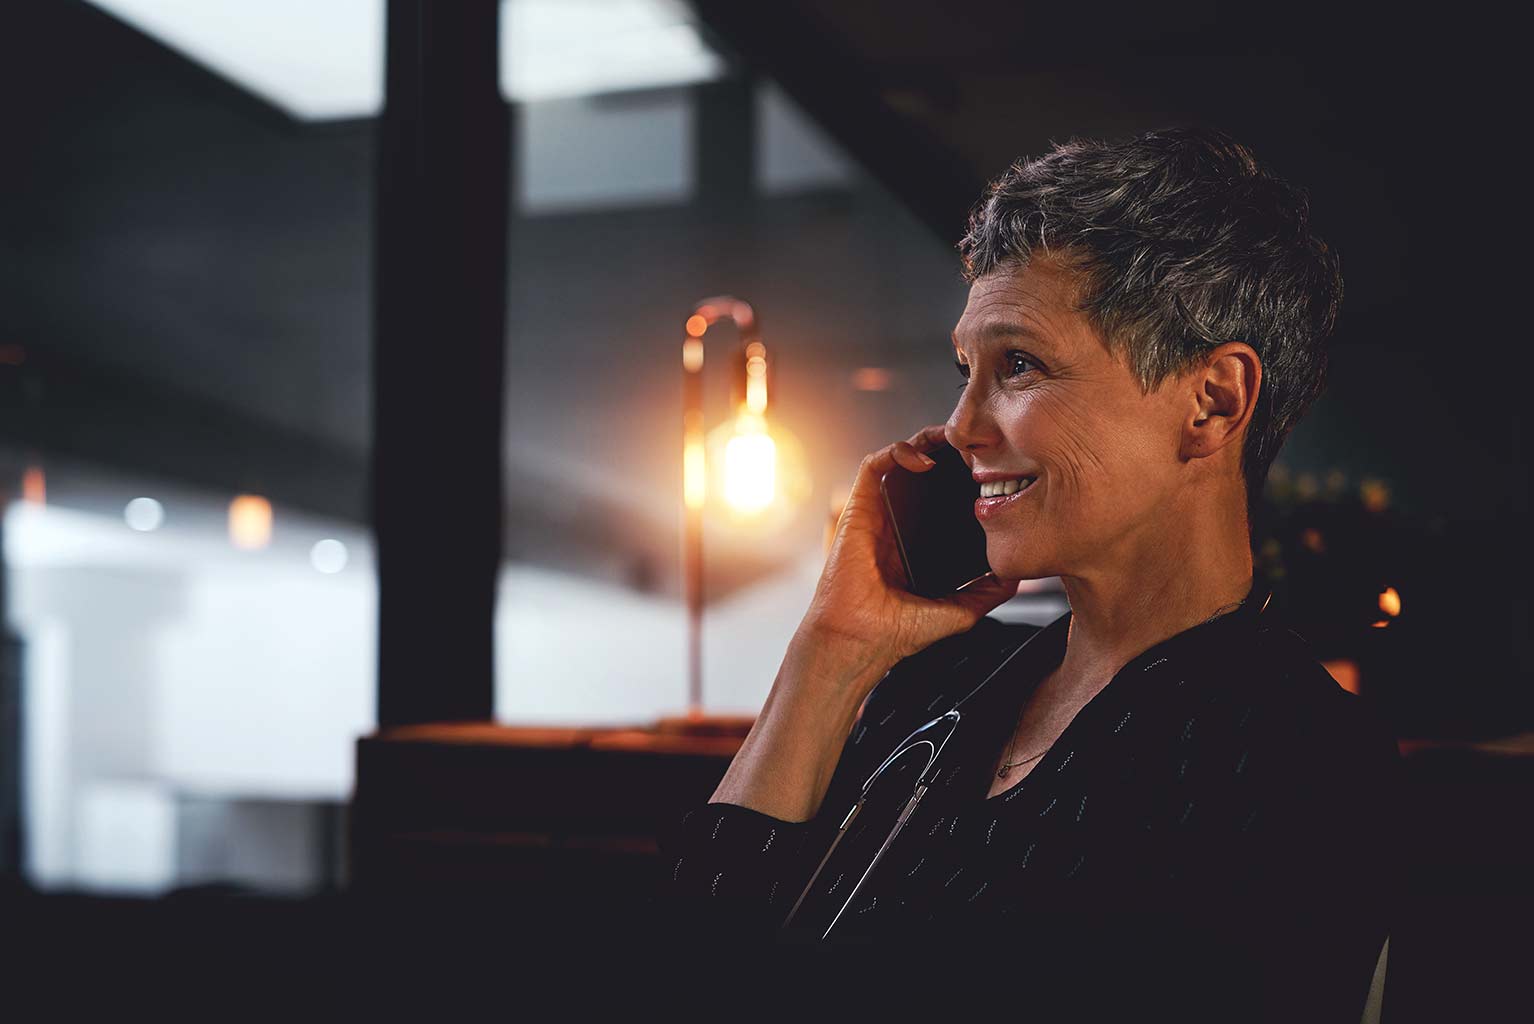 woman with short hair talking on phone